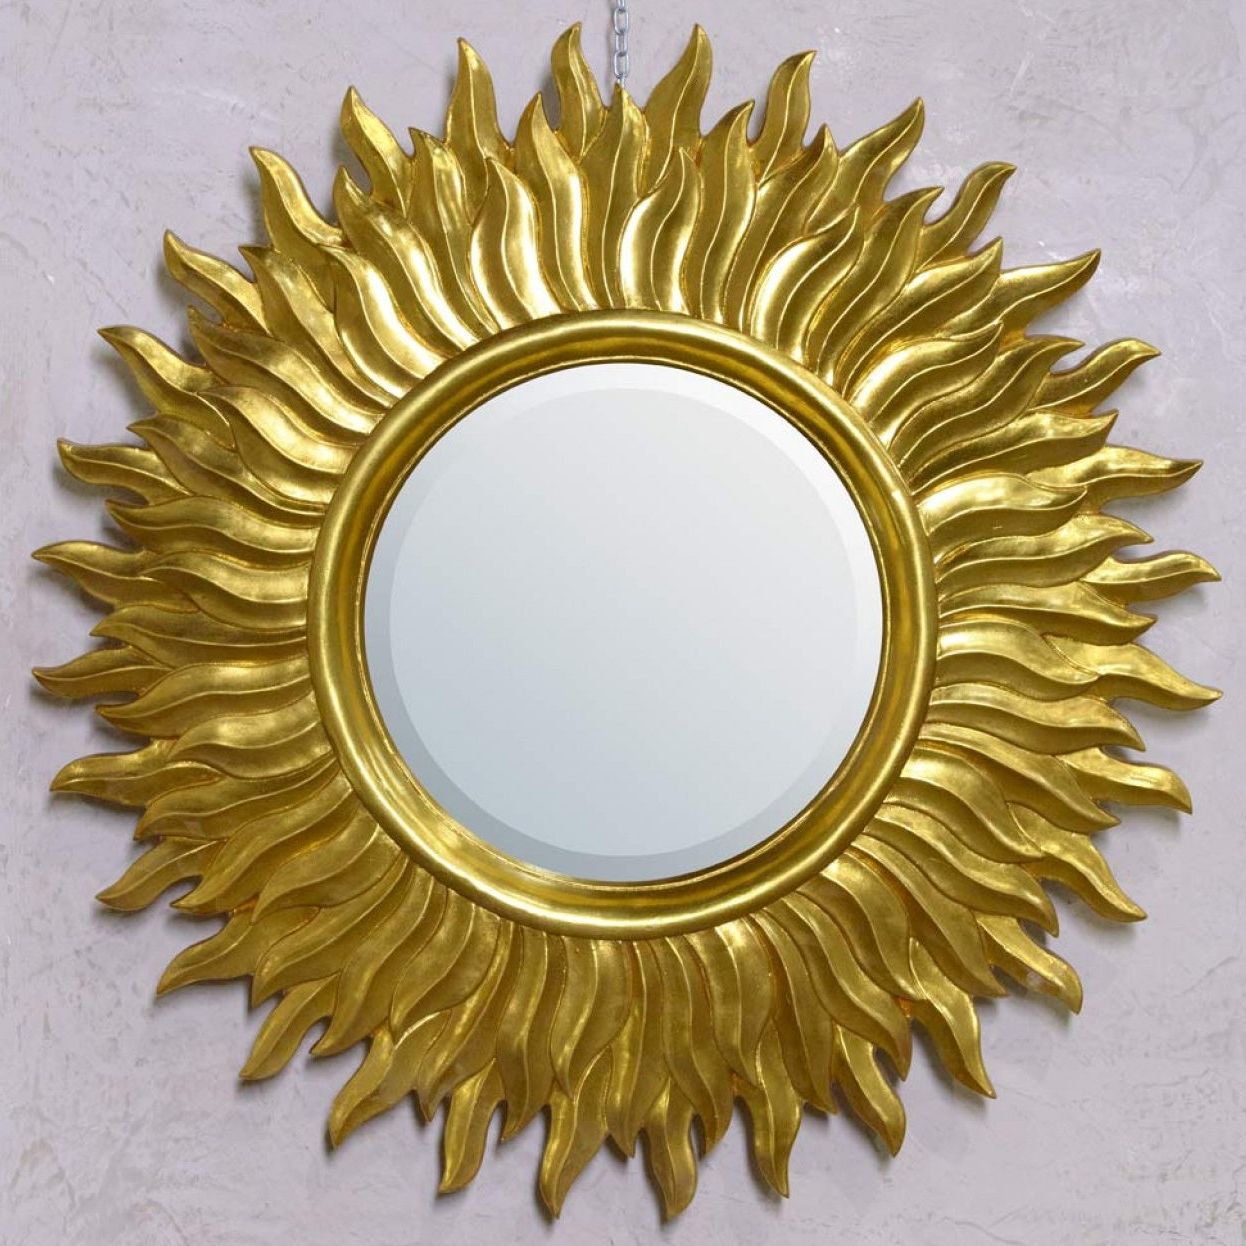 Antique Style Sunburst Gold Round Decorative Wall Mirror With Widely Used Leaf Post Sunburst Round Wall Mirrors (View 6 of 15)